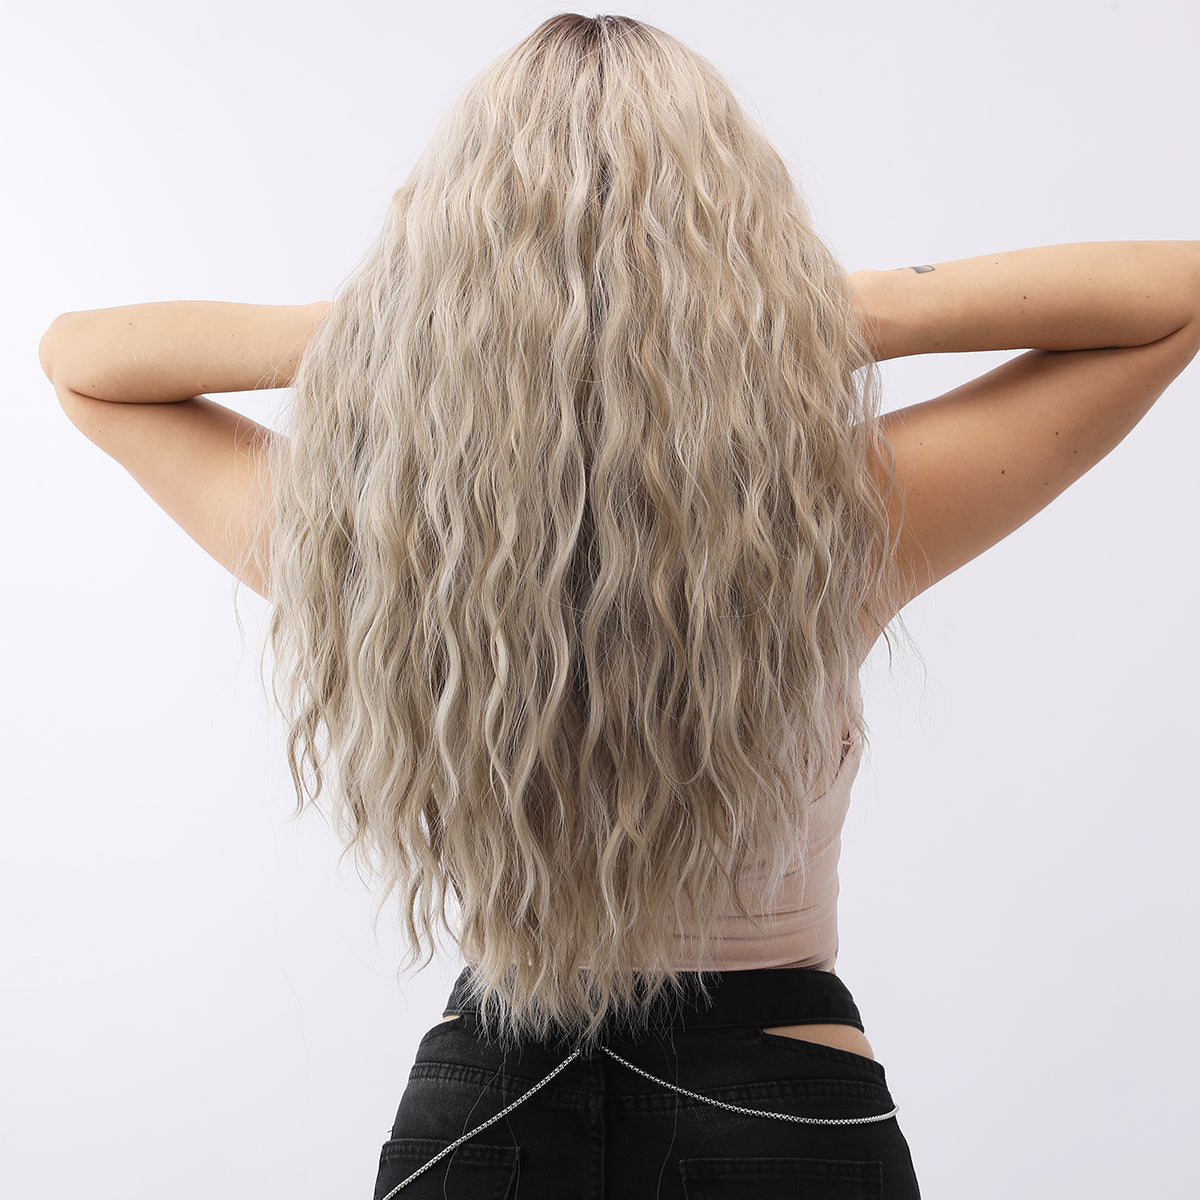 [The Starlet] 24-inch Ombre Grey Loose Wave without Bangs (Synthetic Lace Front Wig)